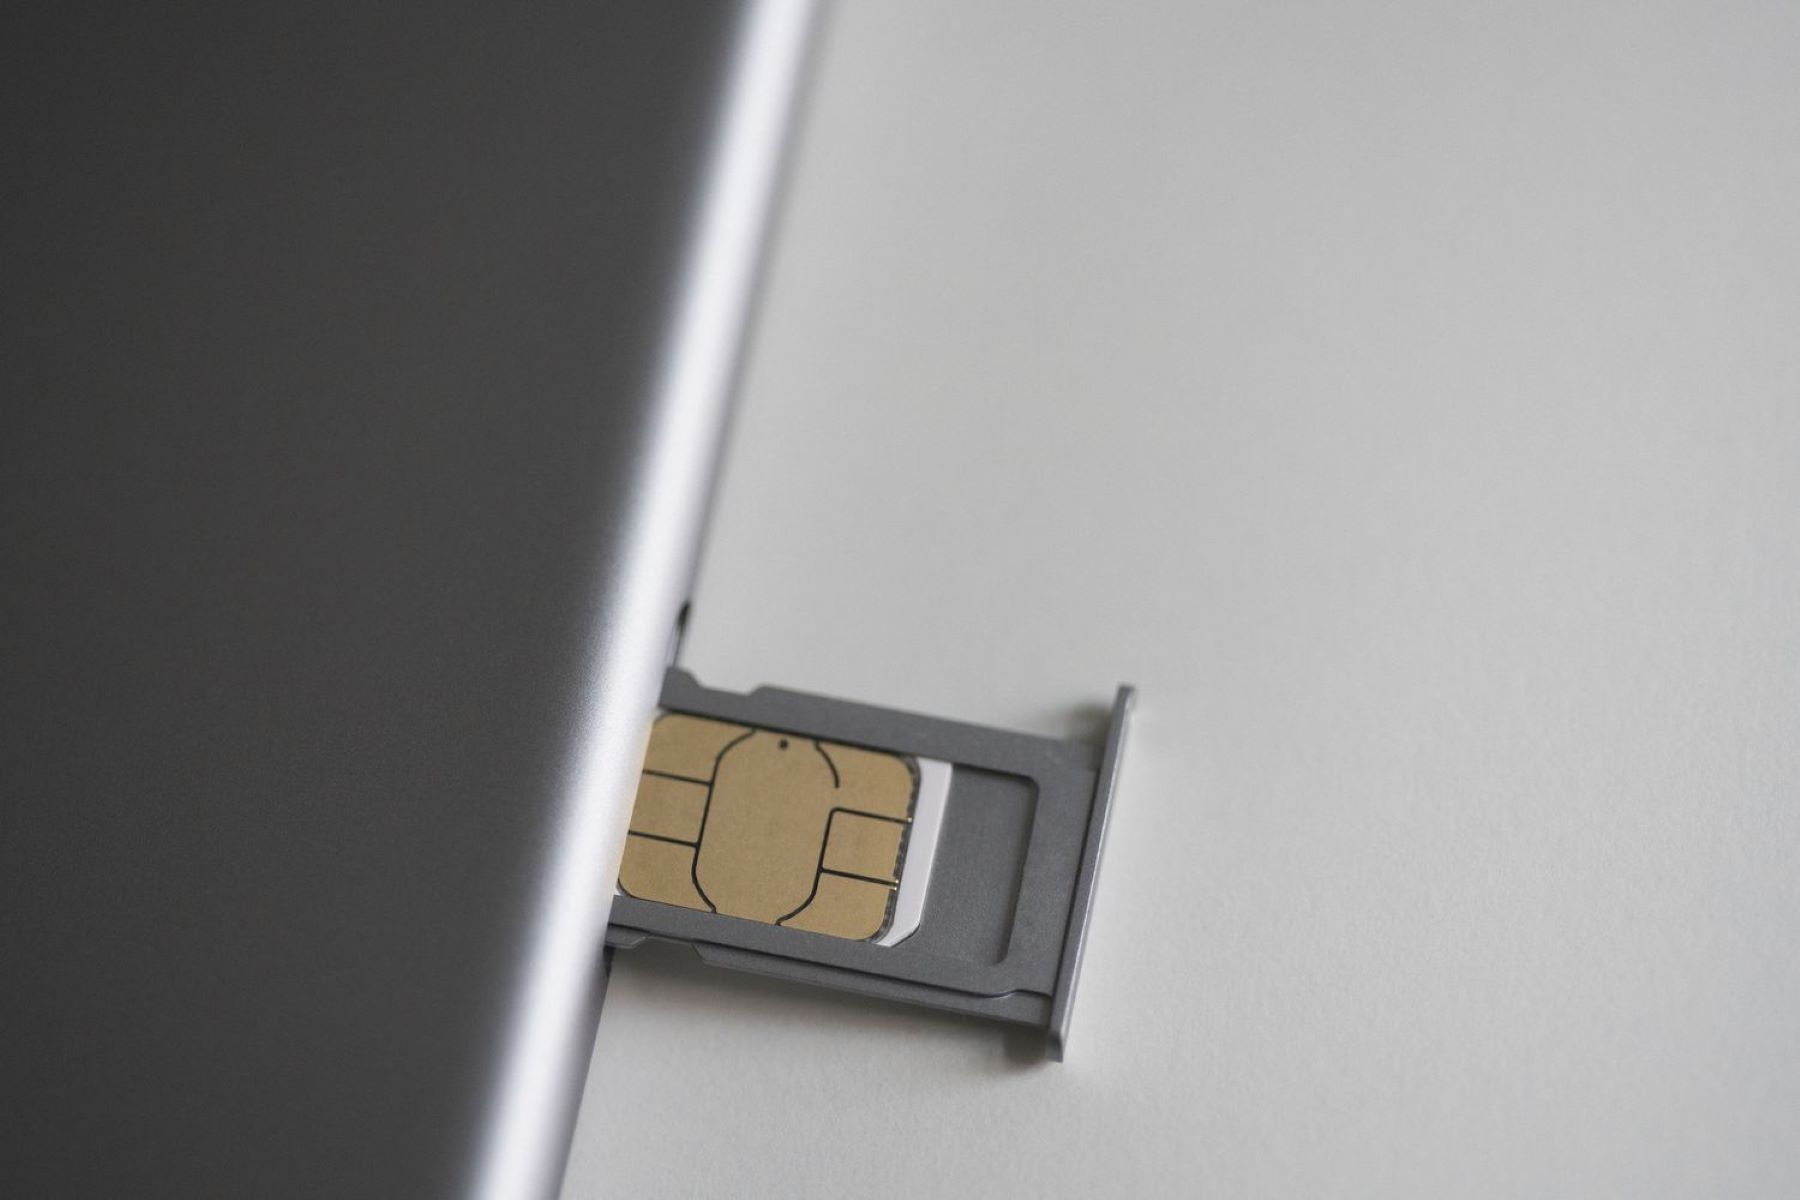 locating-the-sim-card-slot-on-iphone-xs-visual-guide